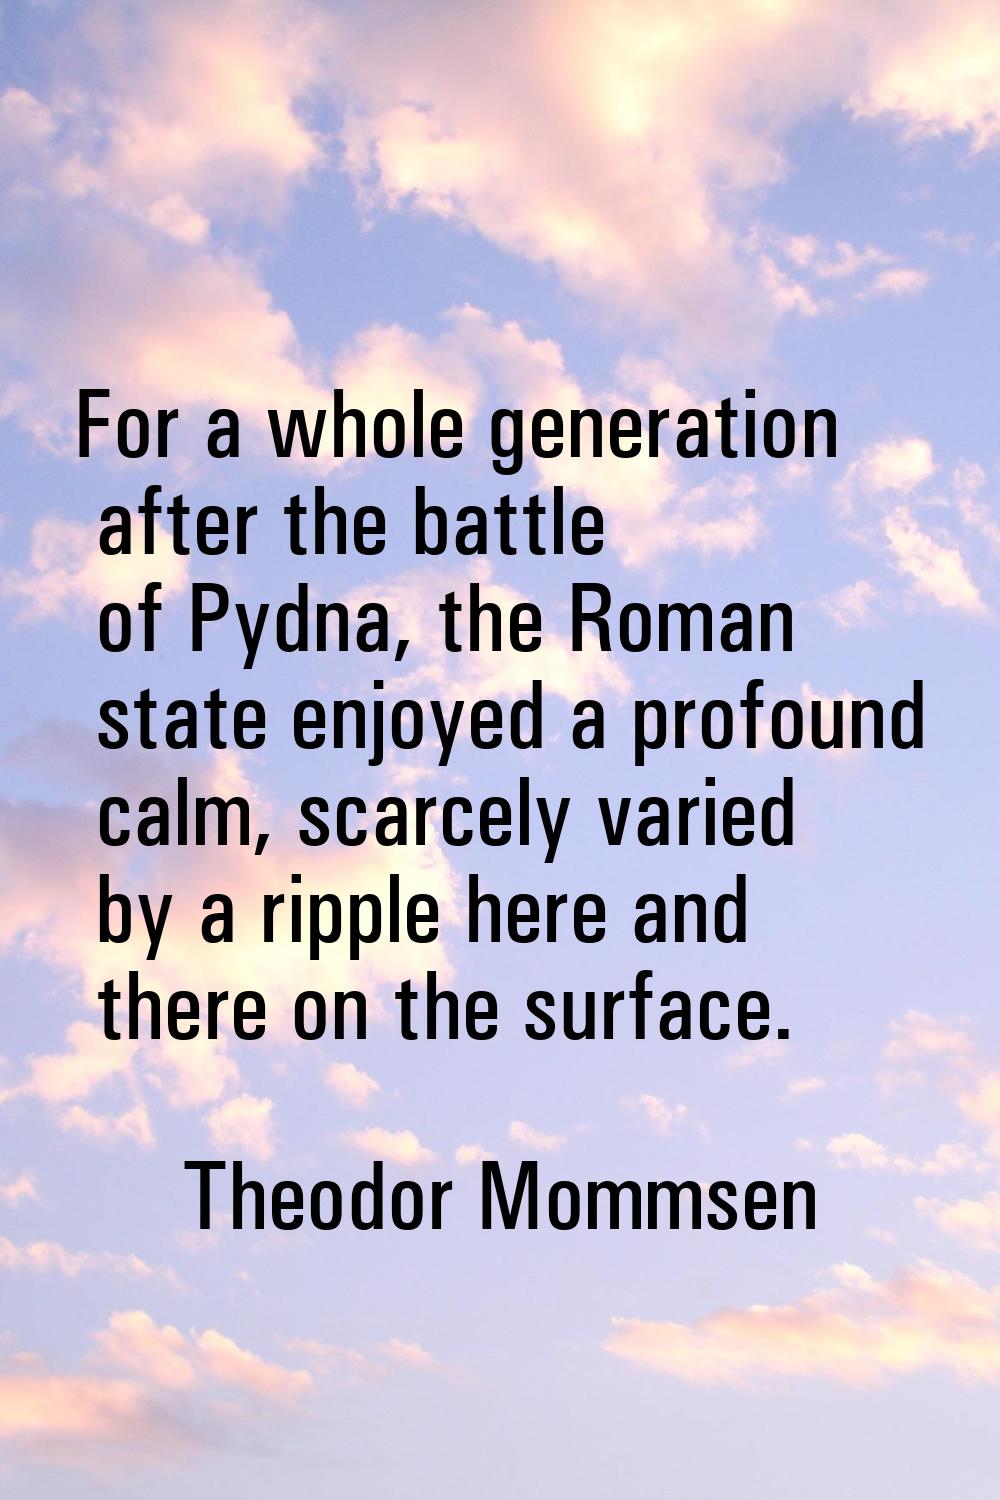 For a whole generation after the battle of Pydna, the Roman state enjoyed a profound calm, scarcely